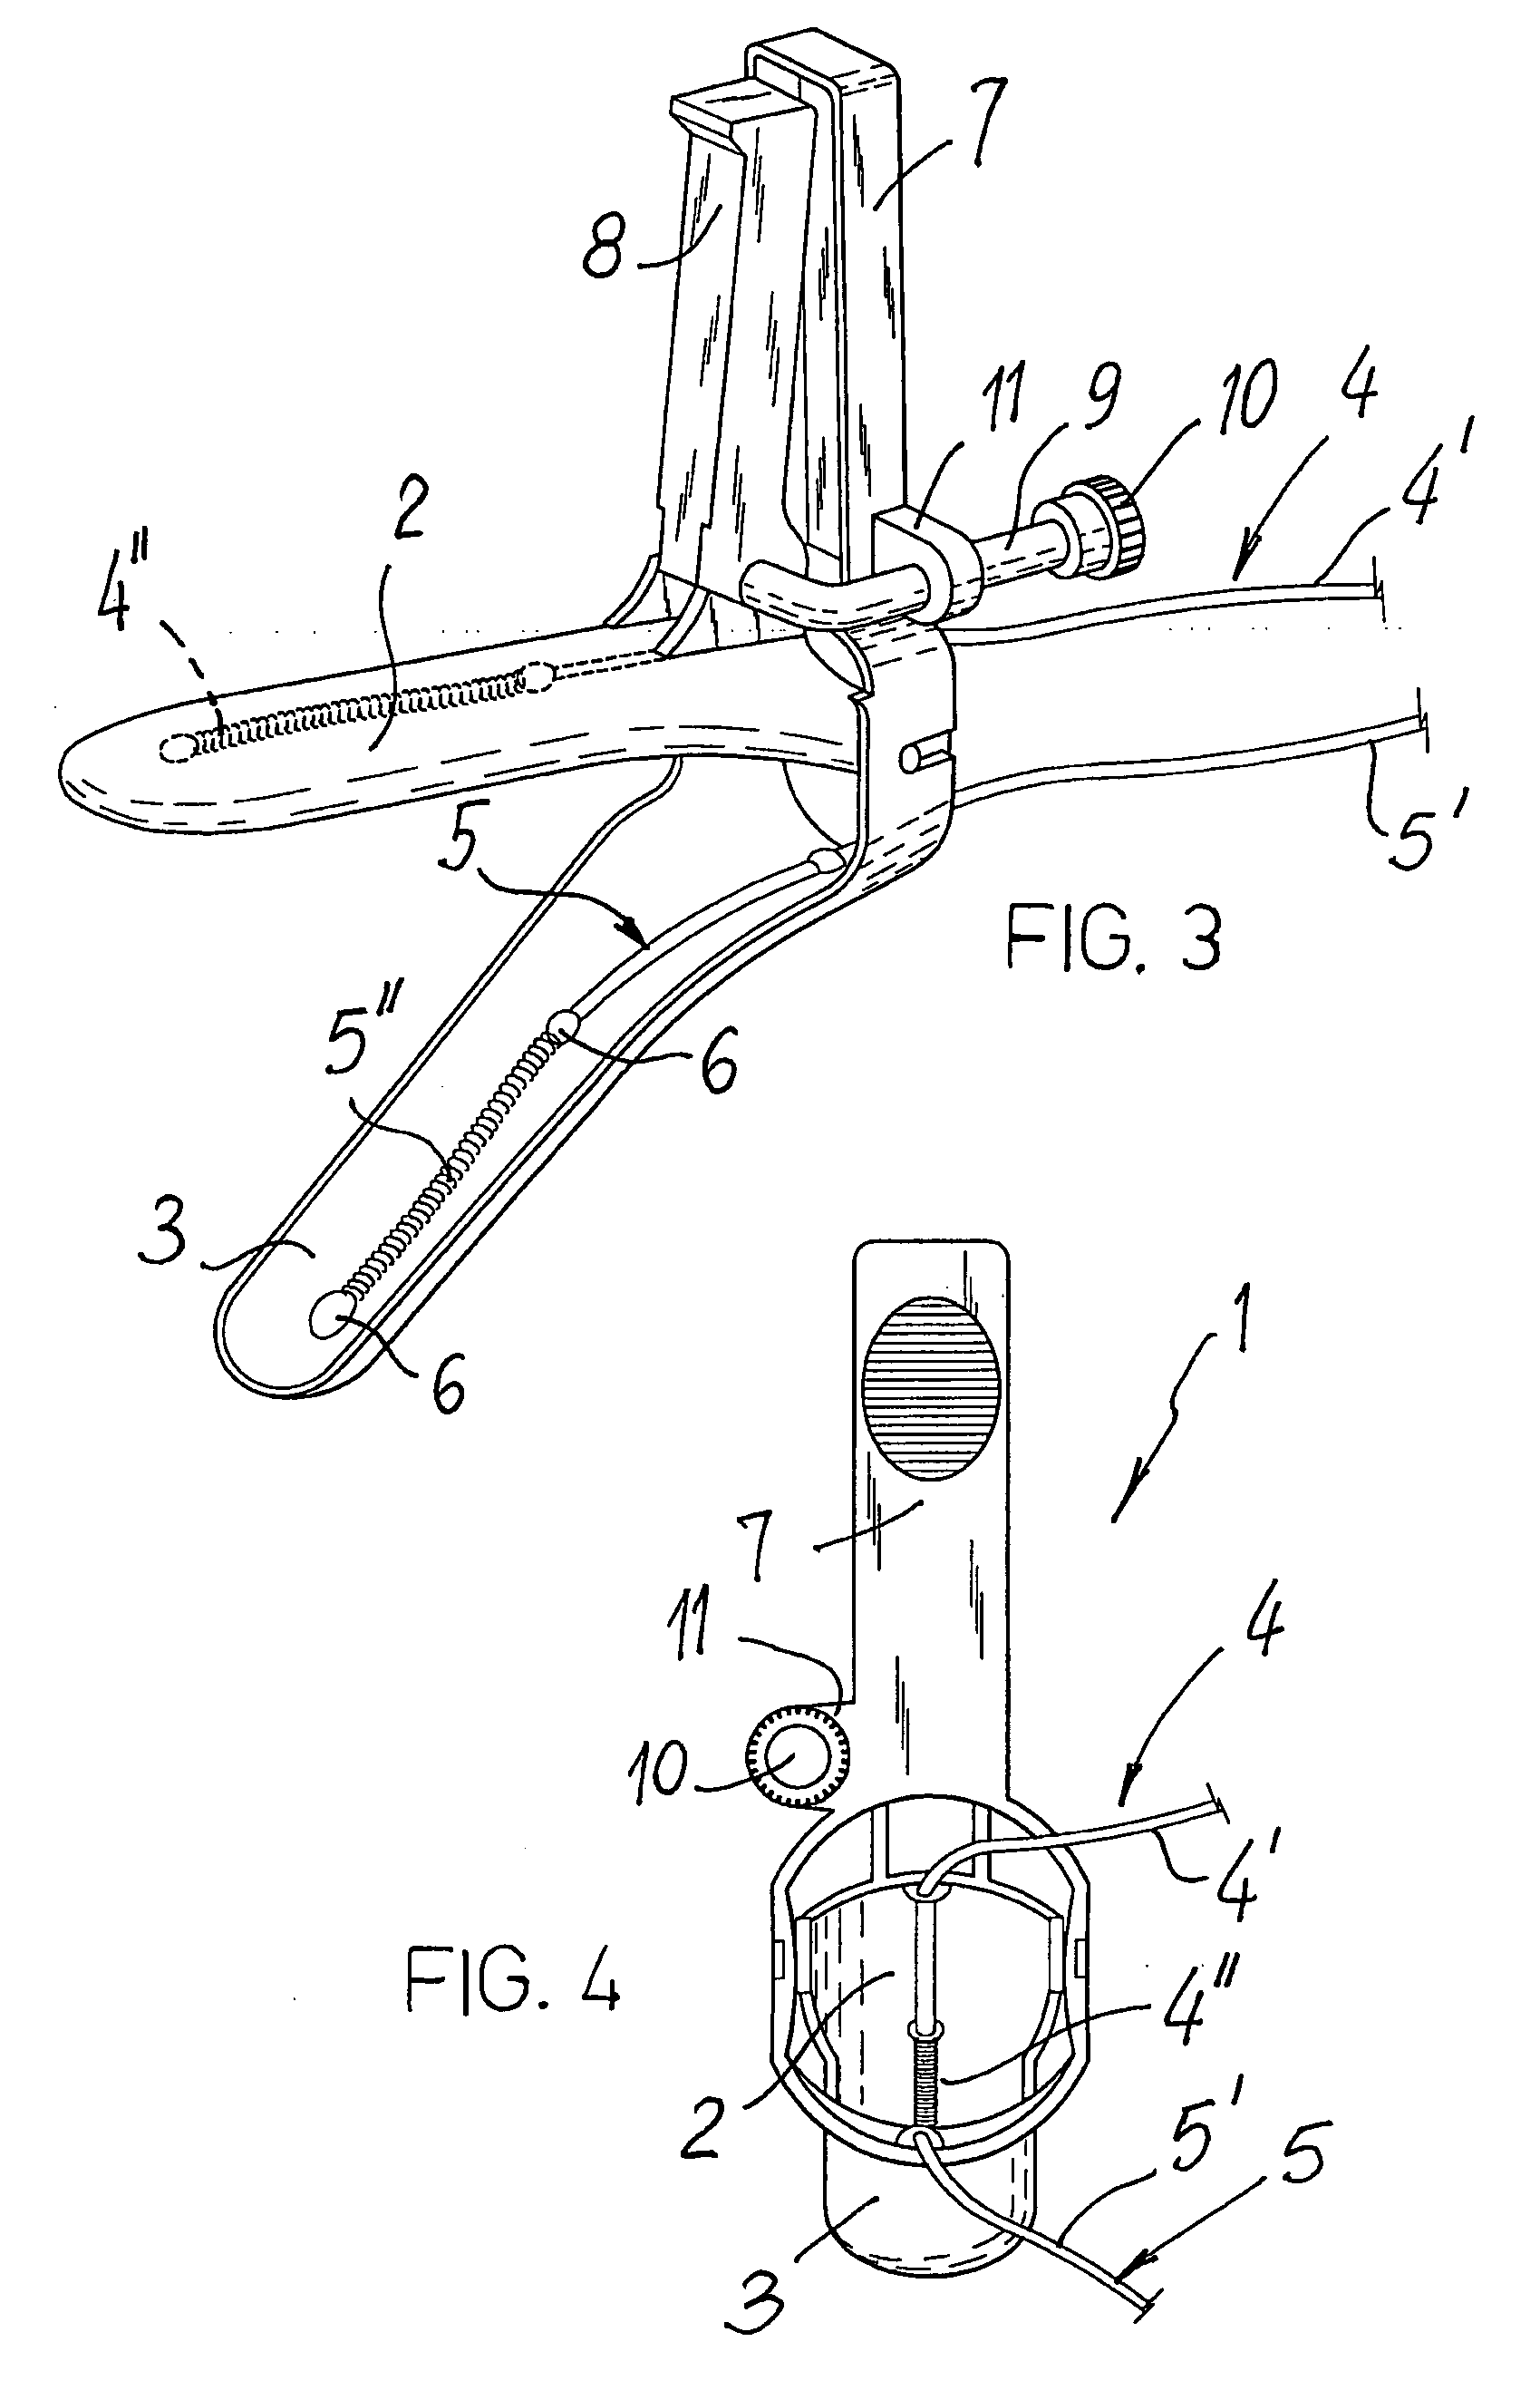 Speculum for the electropharmacological treatment of vaginal diseases